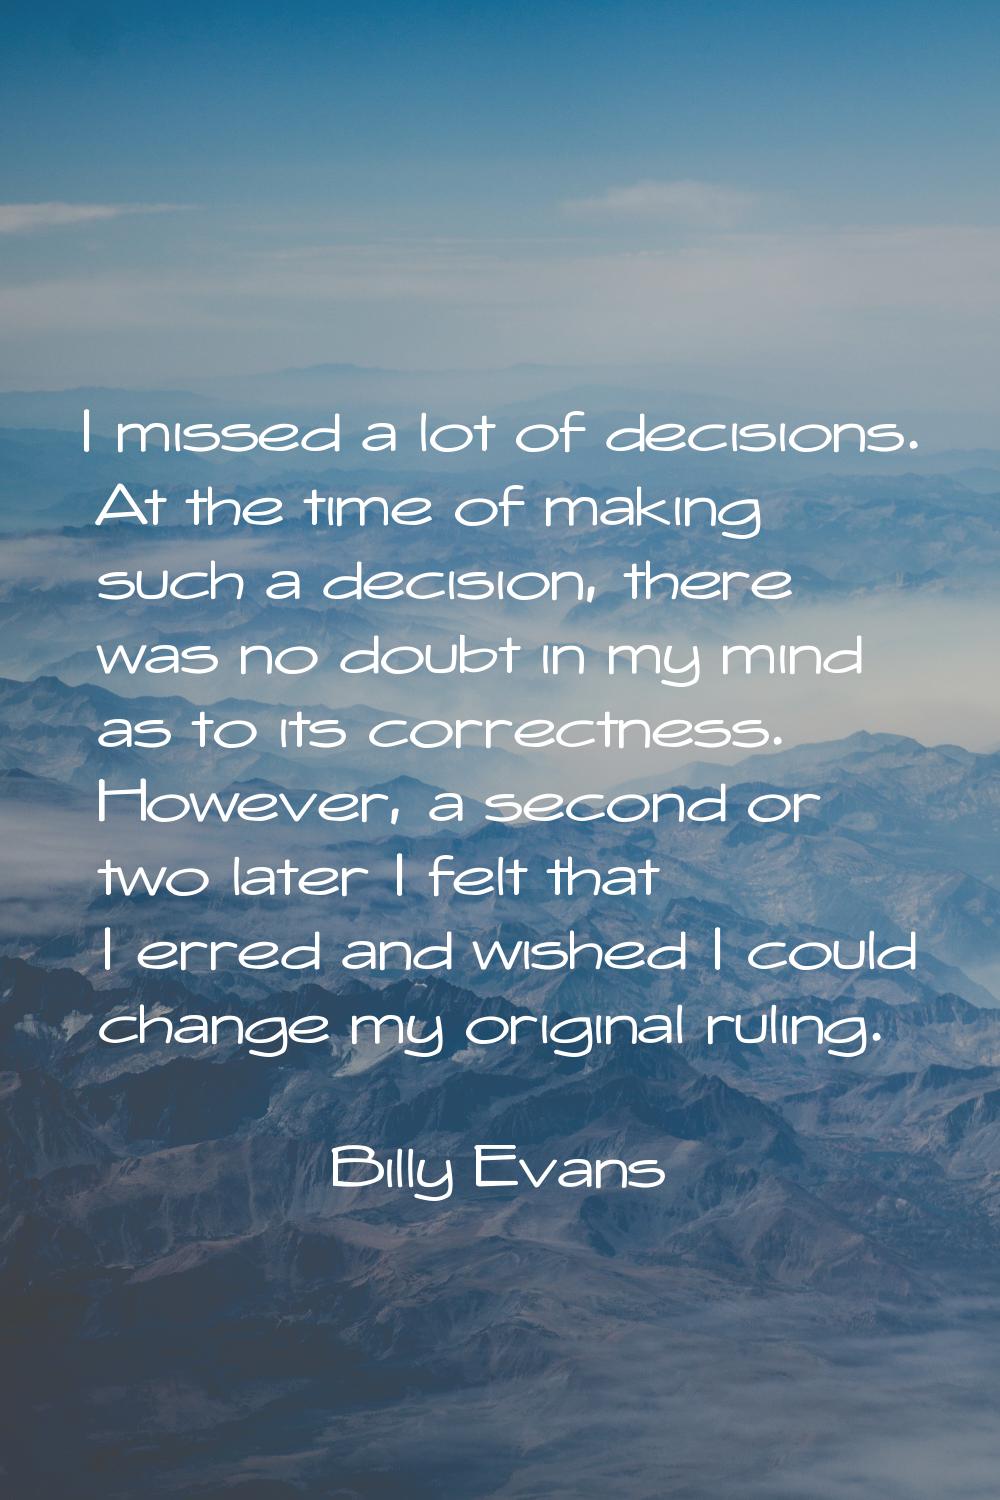 I missed a lot of decisions. At the time of making such a decision, there was no doubt in my mind a